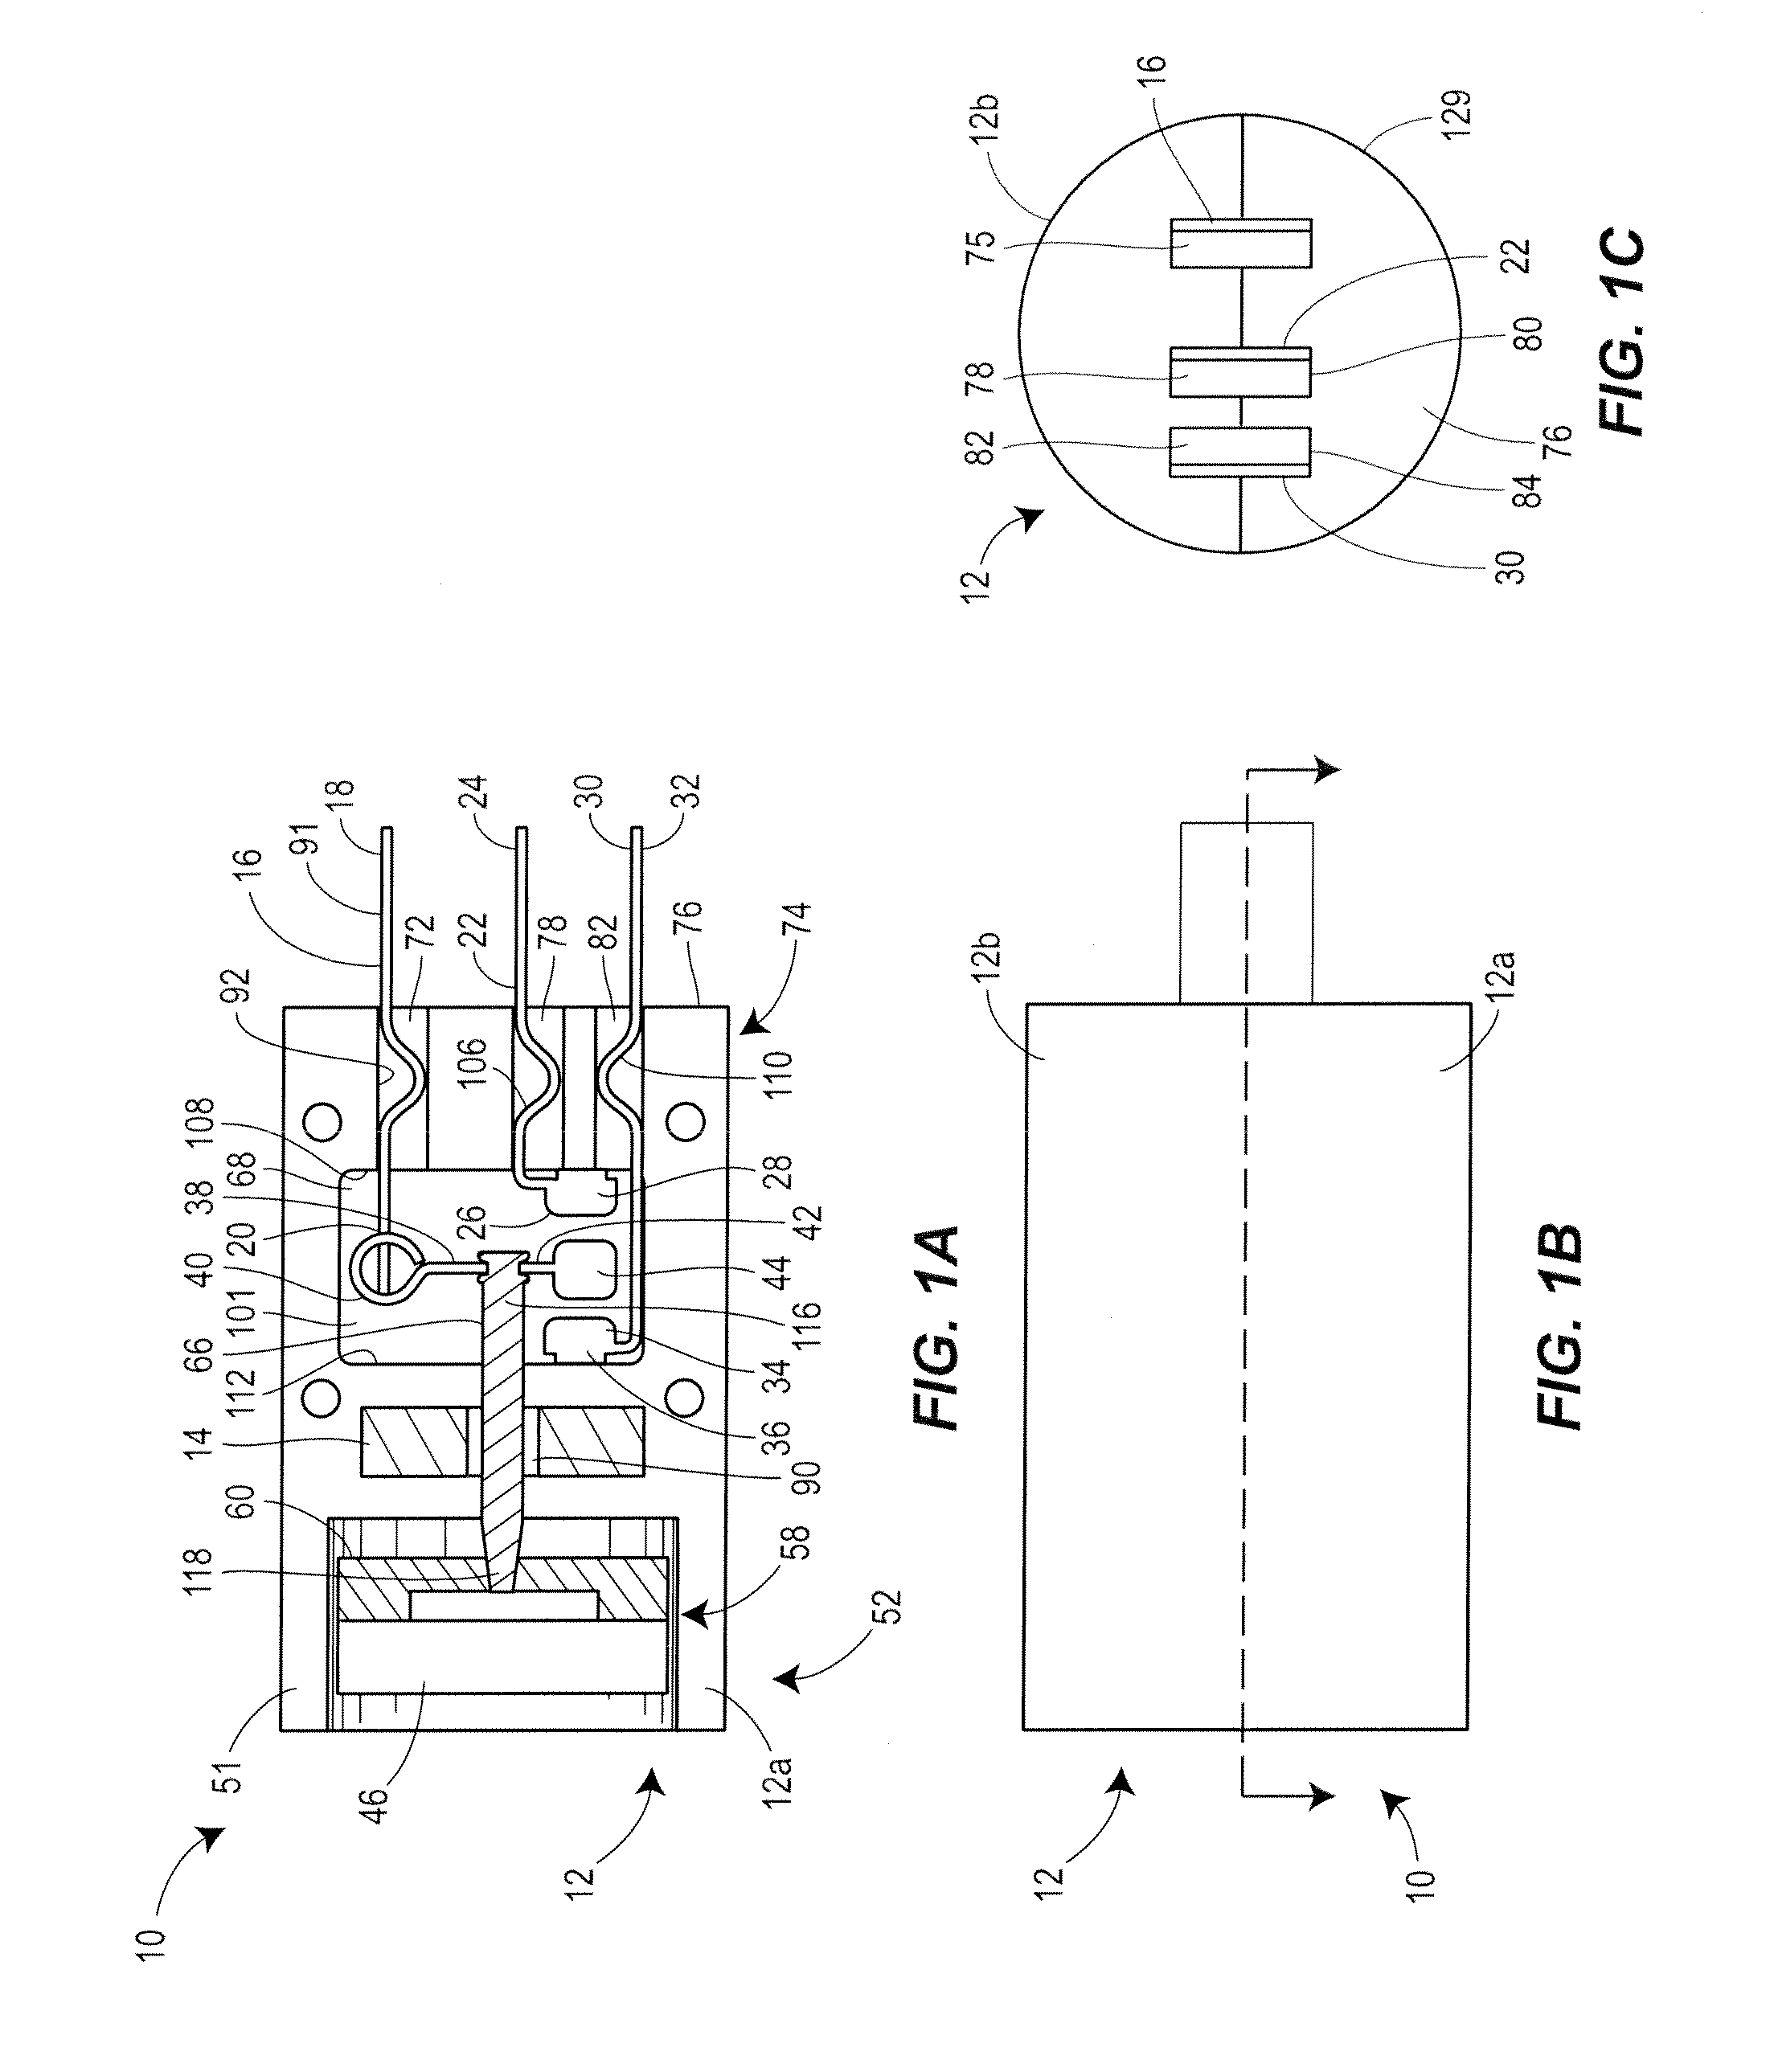 Magnetically-triggered proximity switch